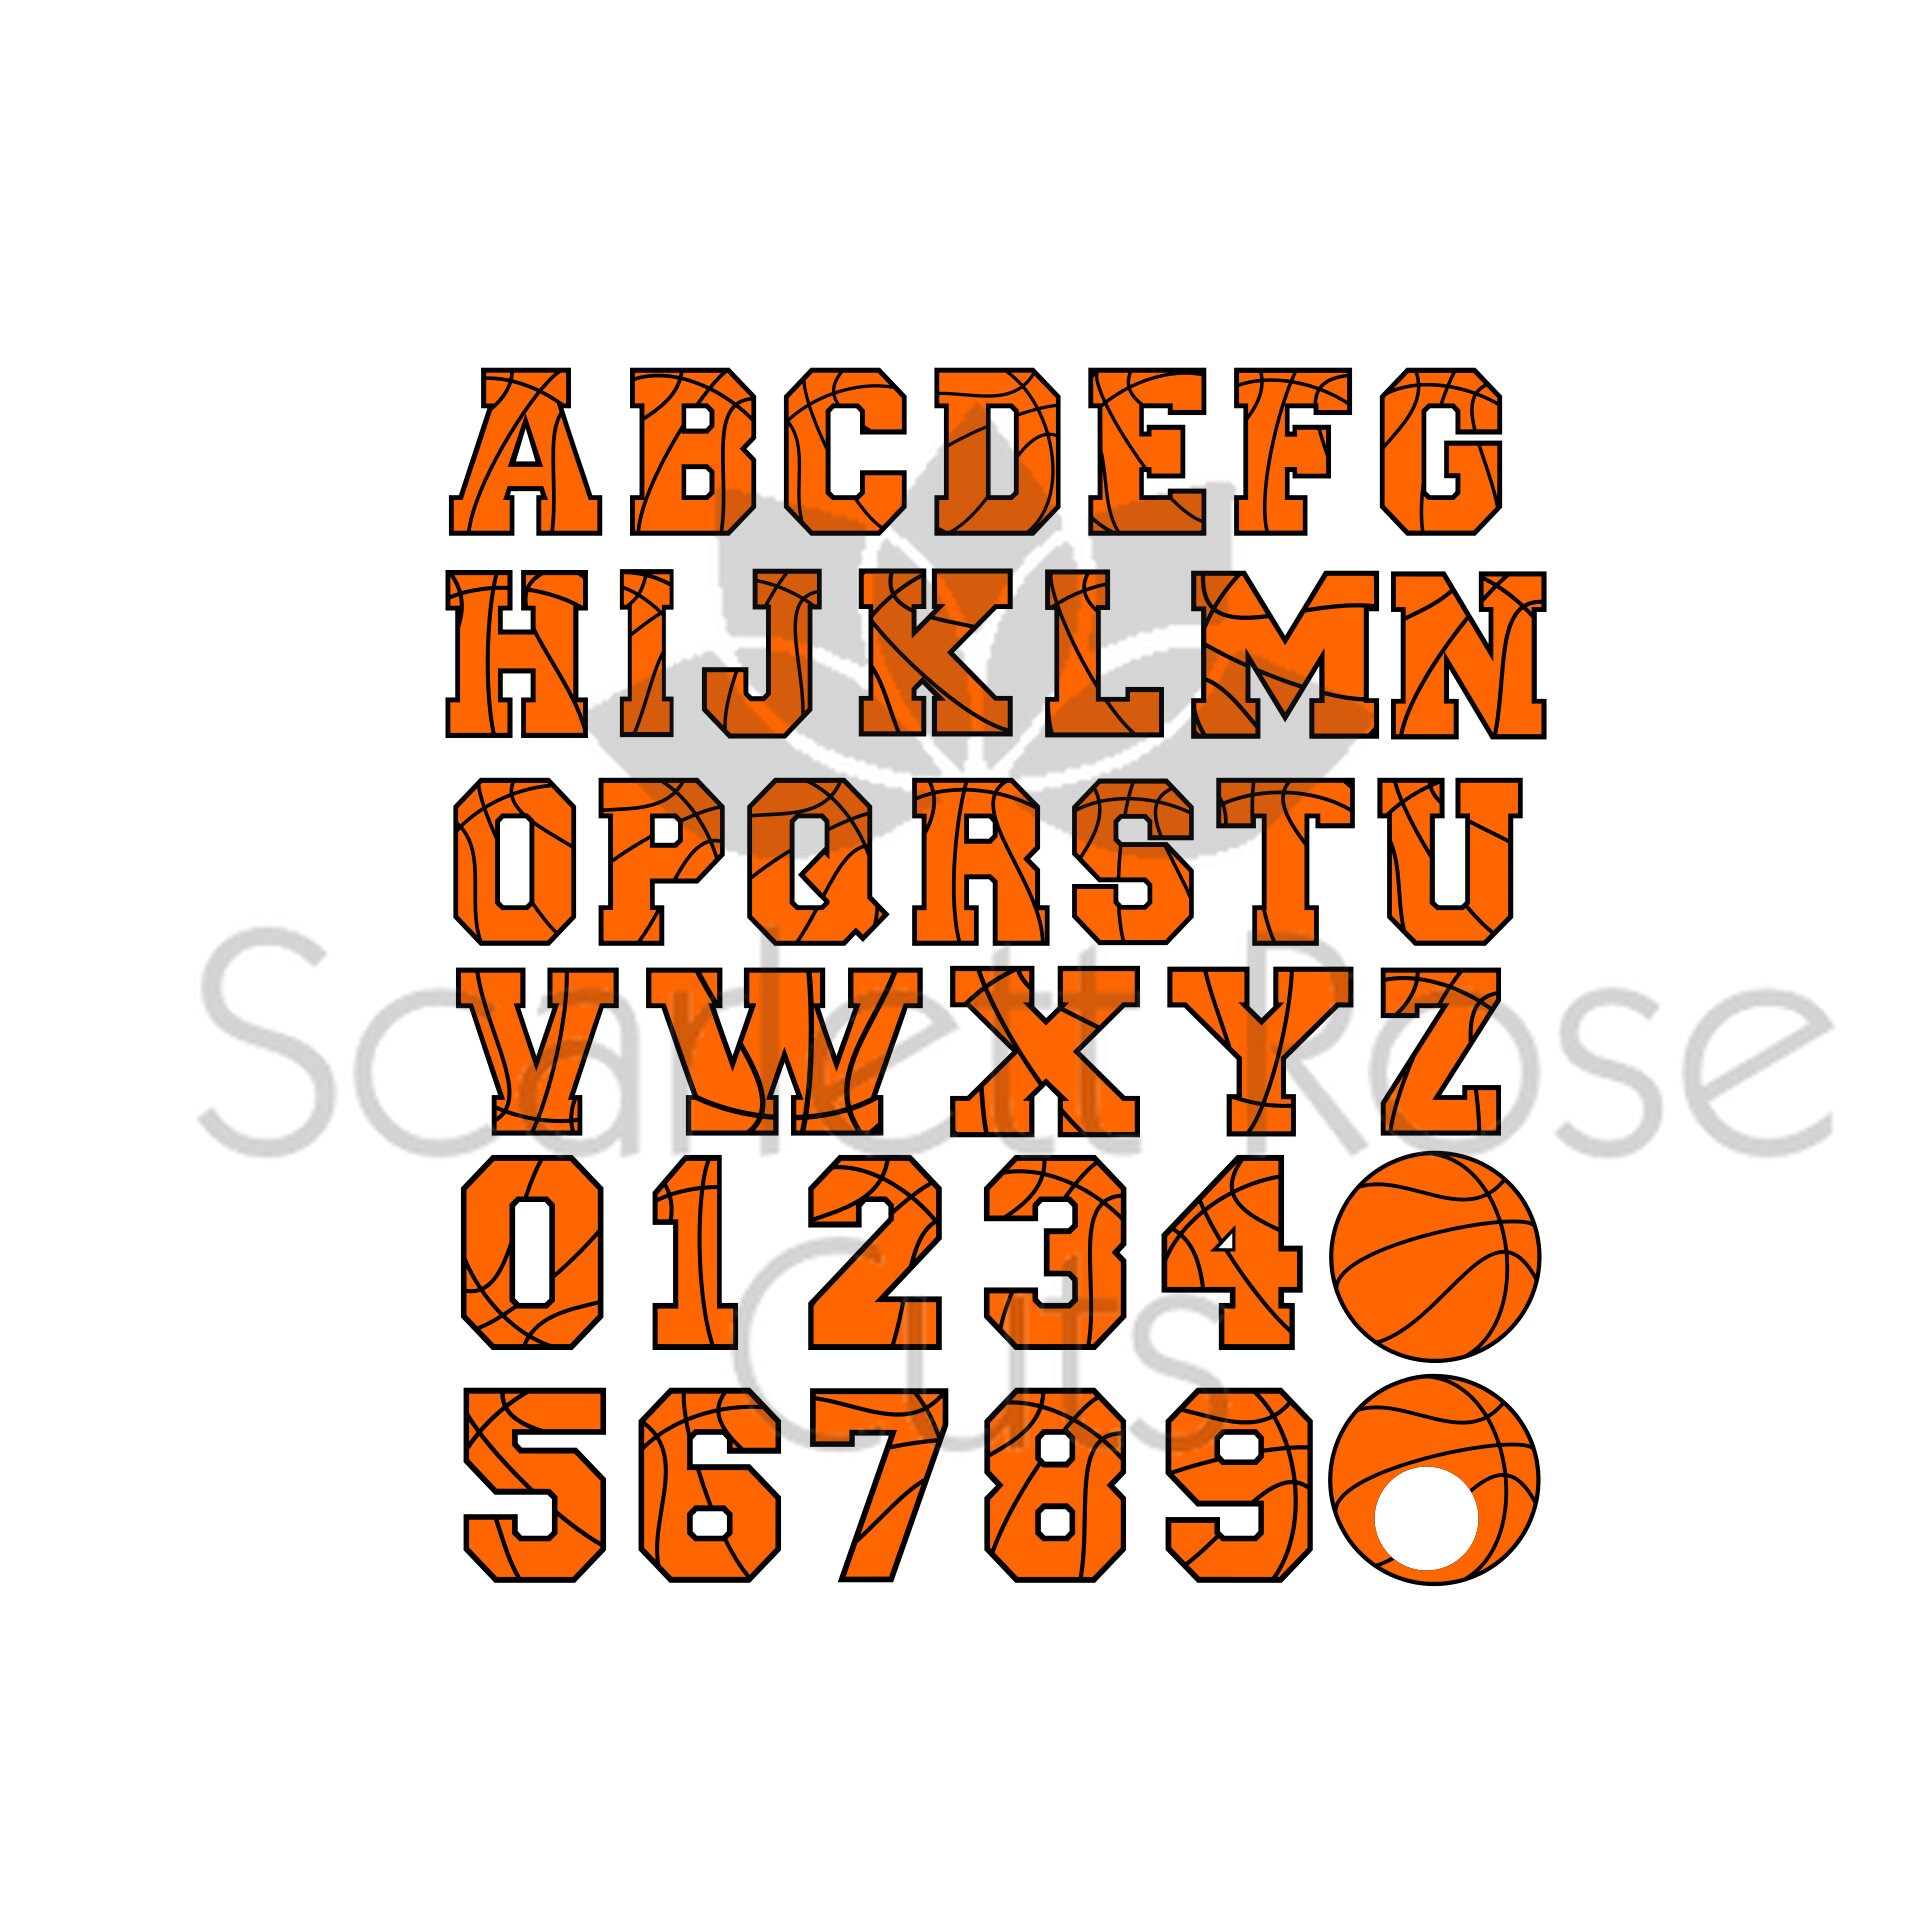 Download Basketball letters font and numbers SVG cut file for